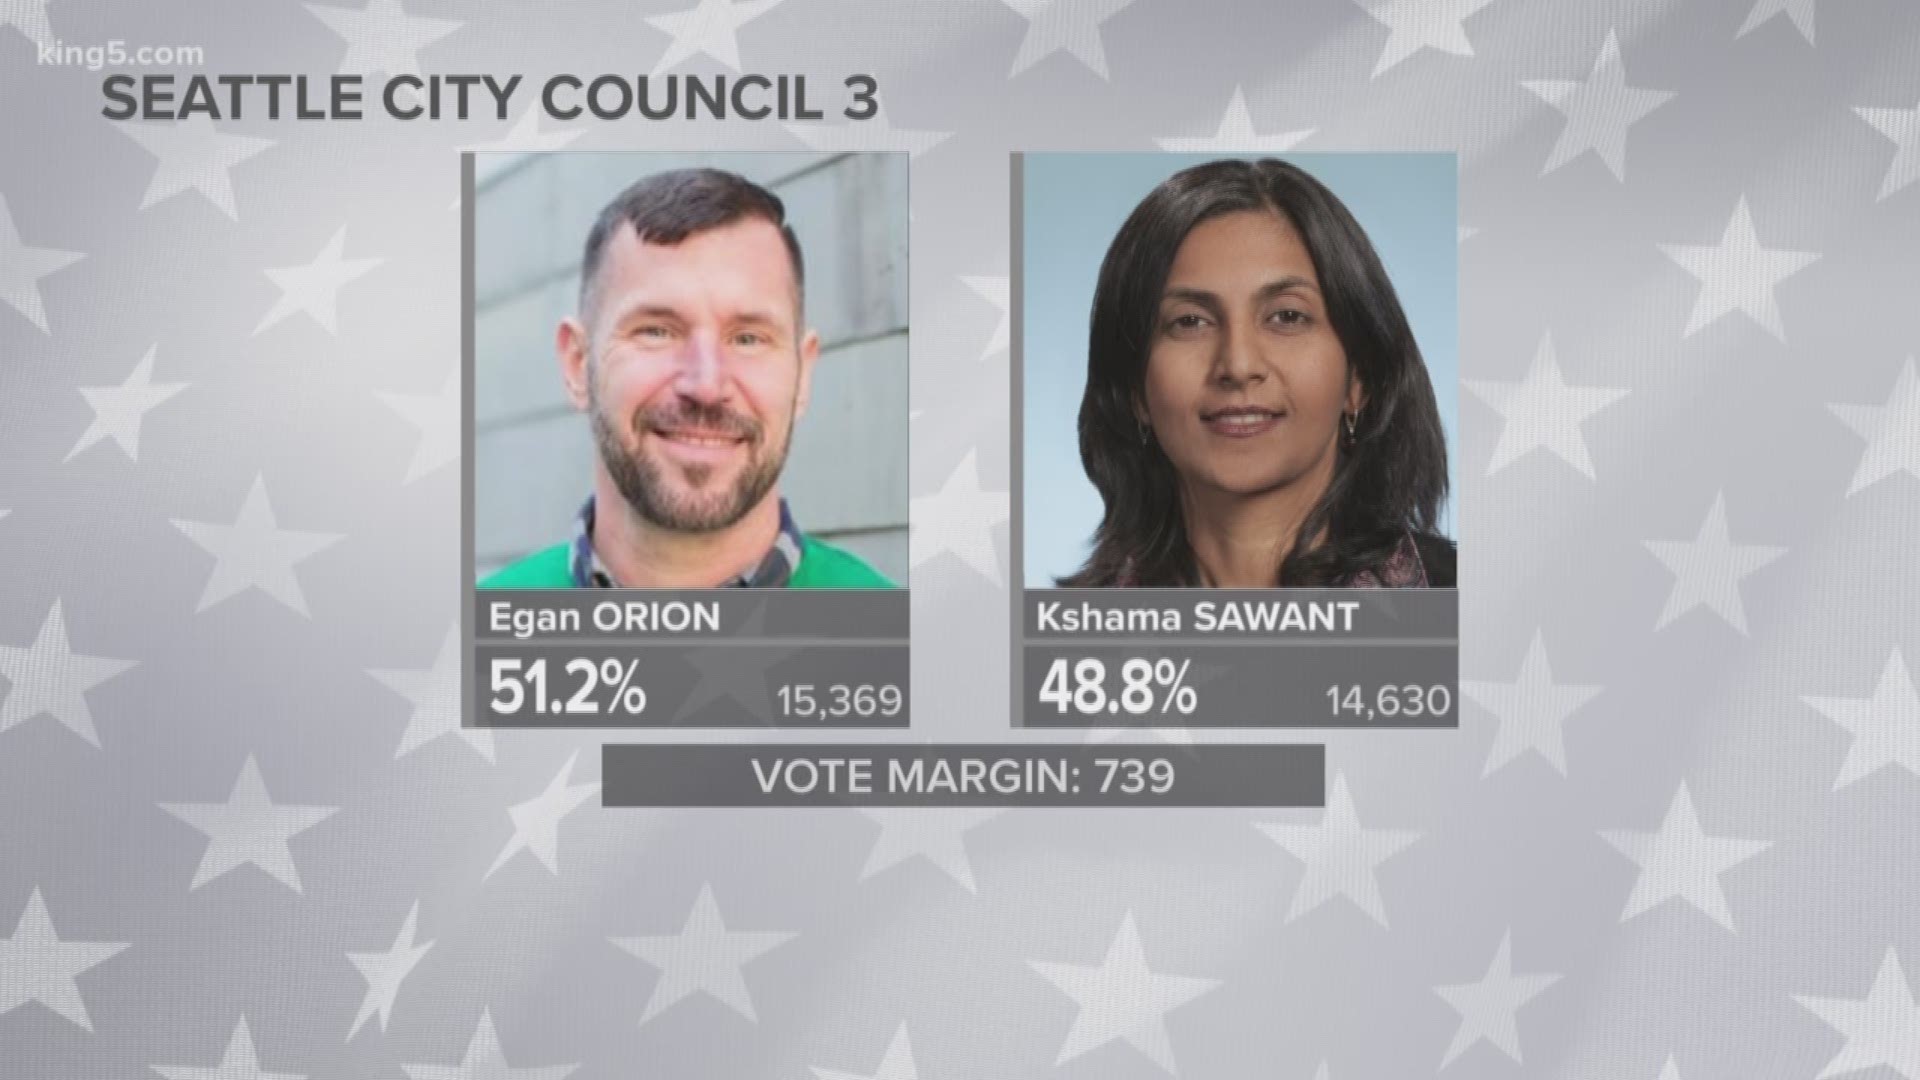 There has been dramatic movement in several Seattle City Council races after the third round of results were released Thursday.